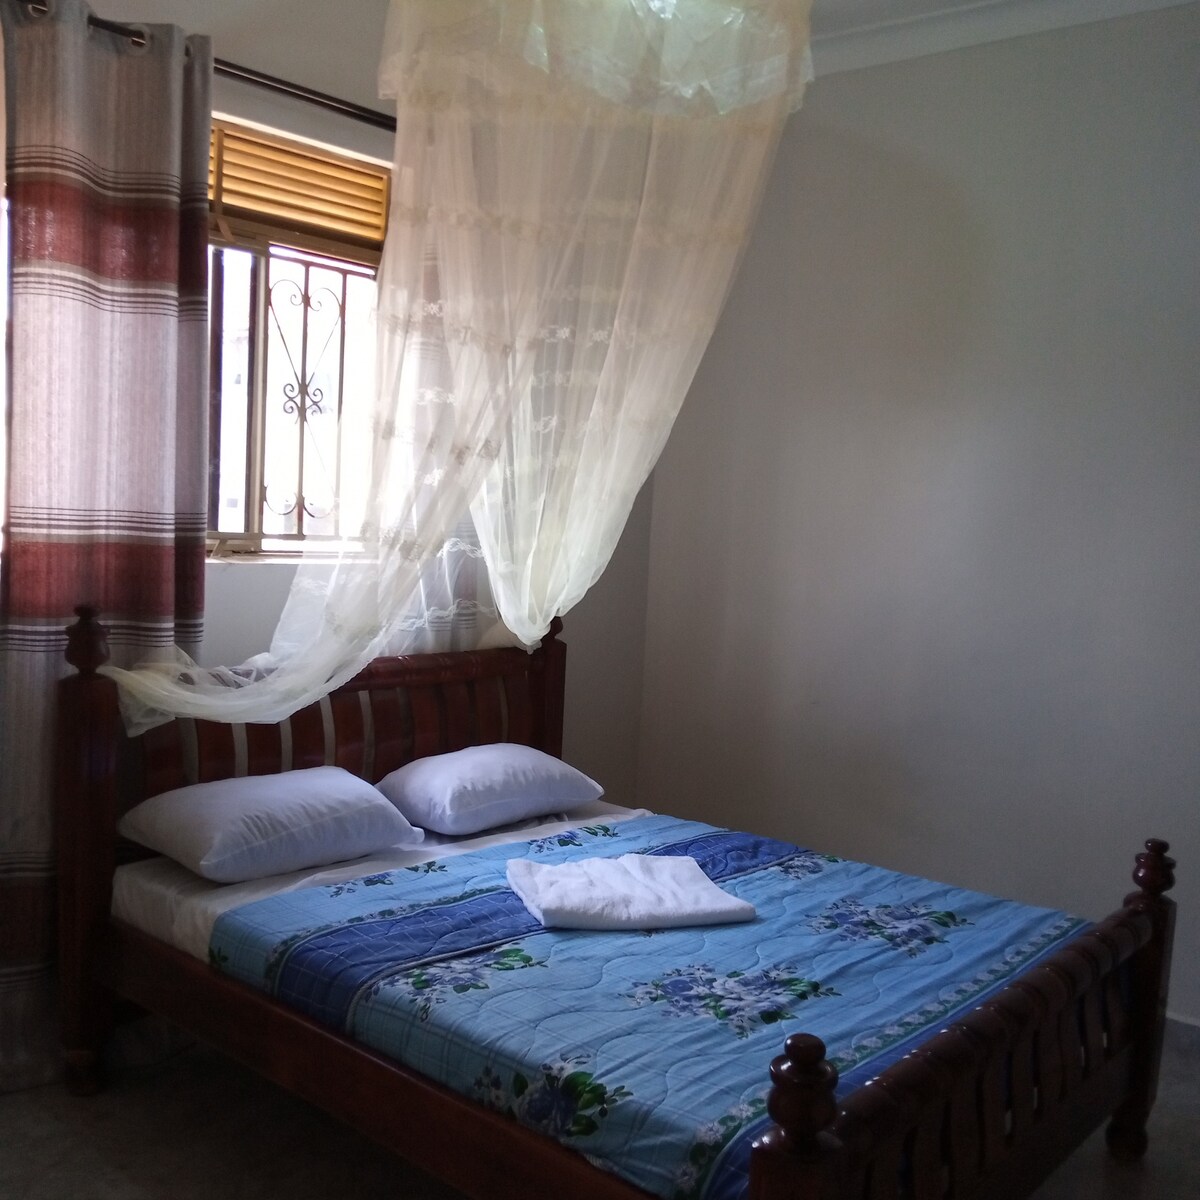 An exquisite fully furnished home in a cool env't.